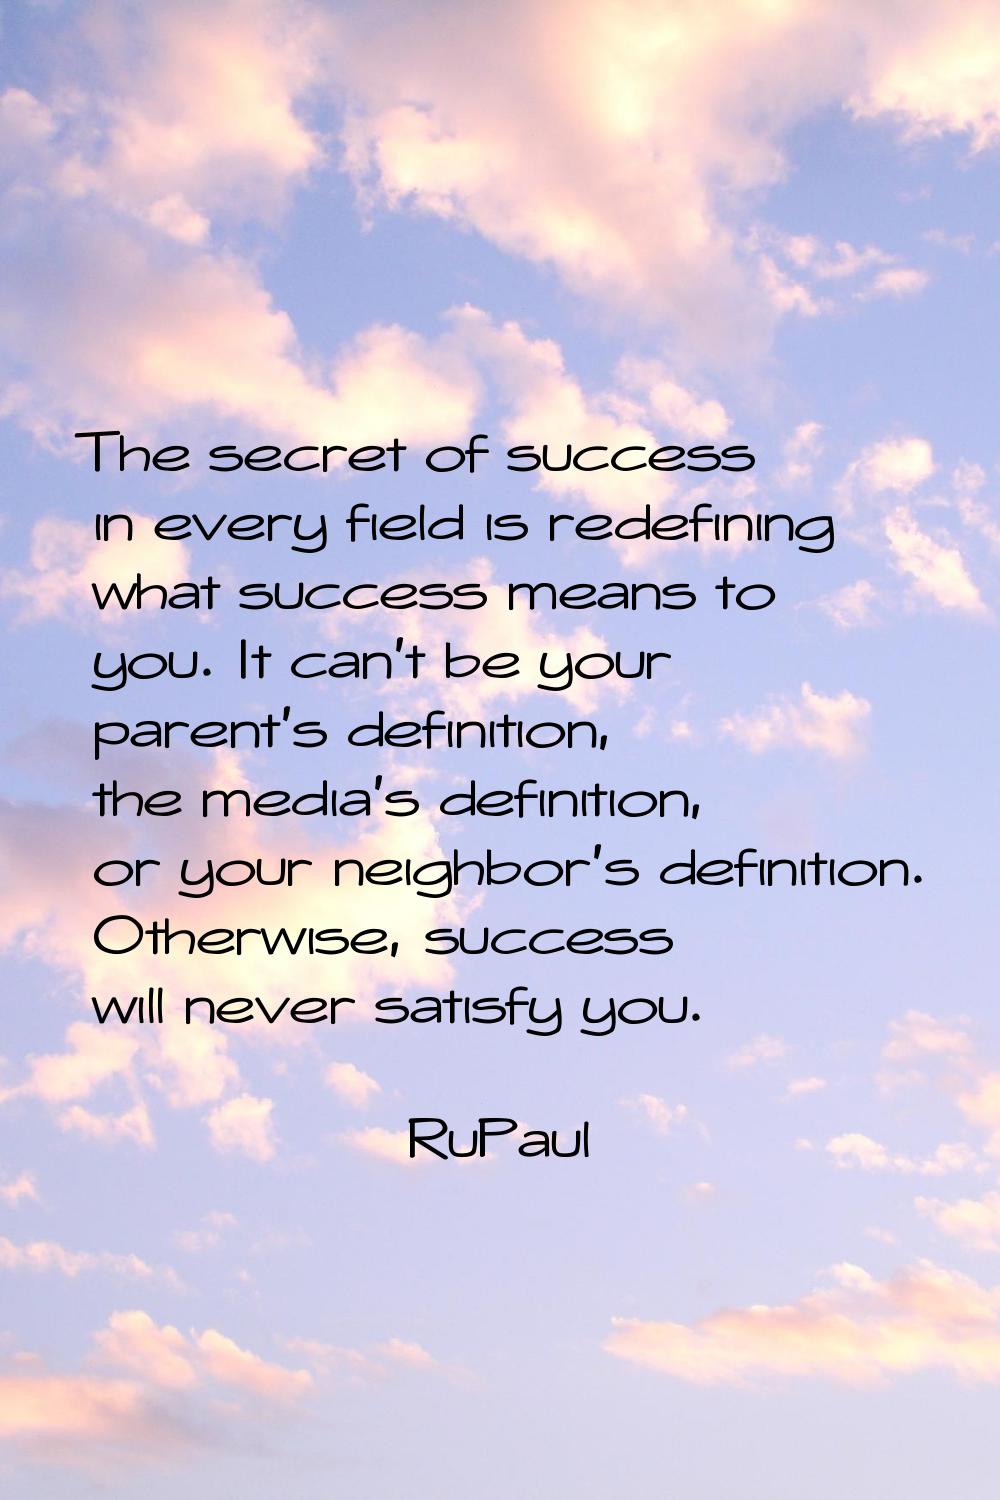 The secret of success in every field is redefining what success means to you. It can't be your pare